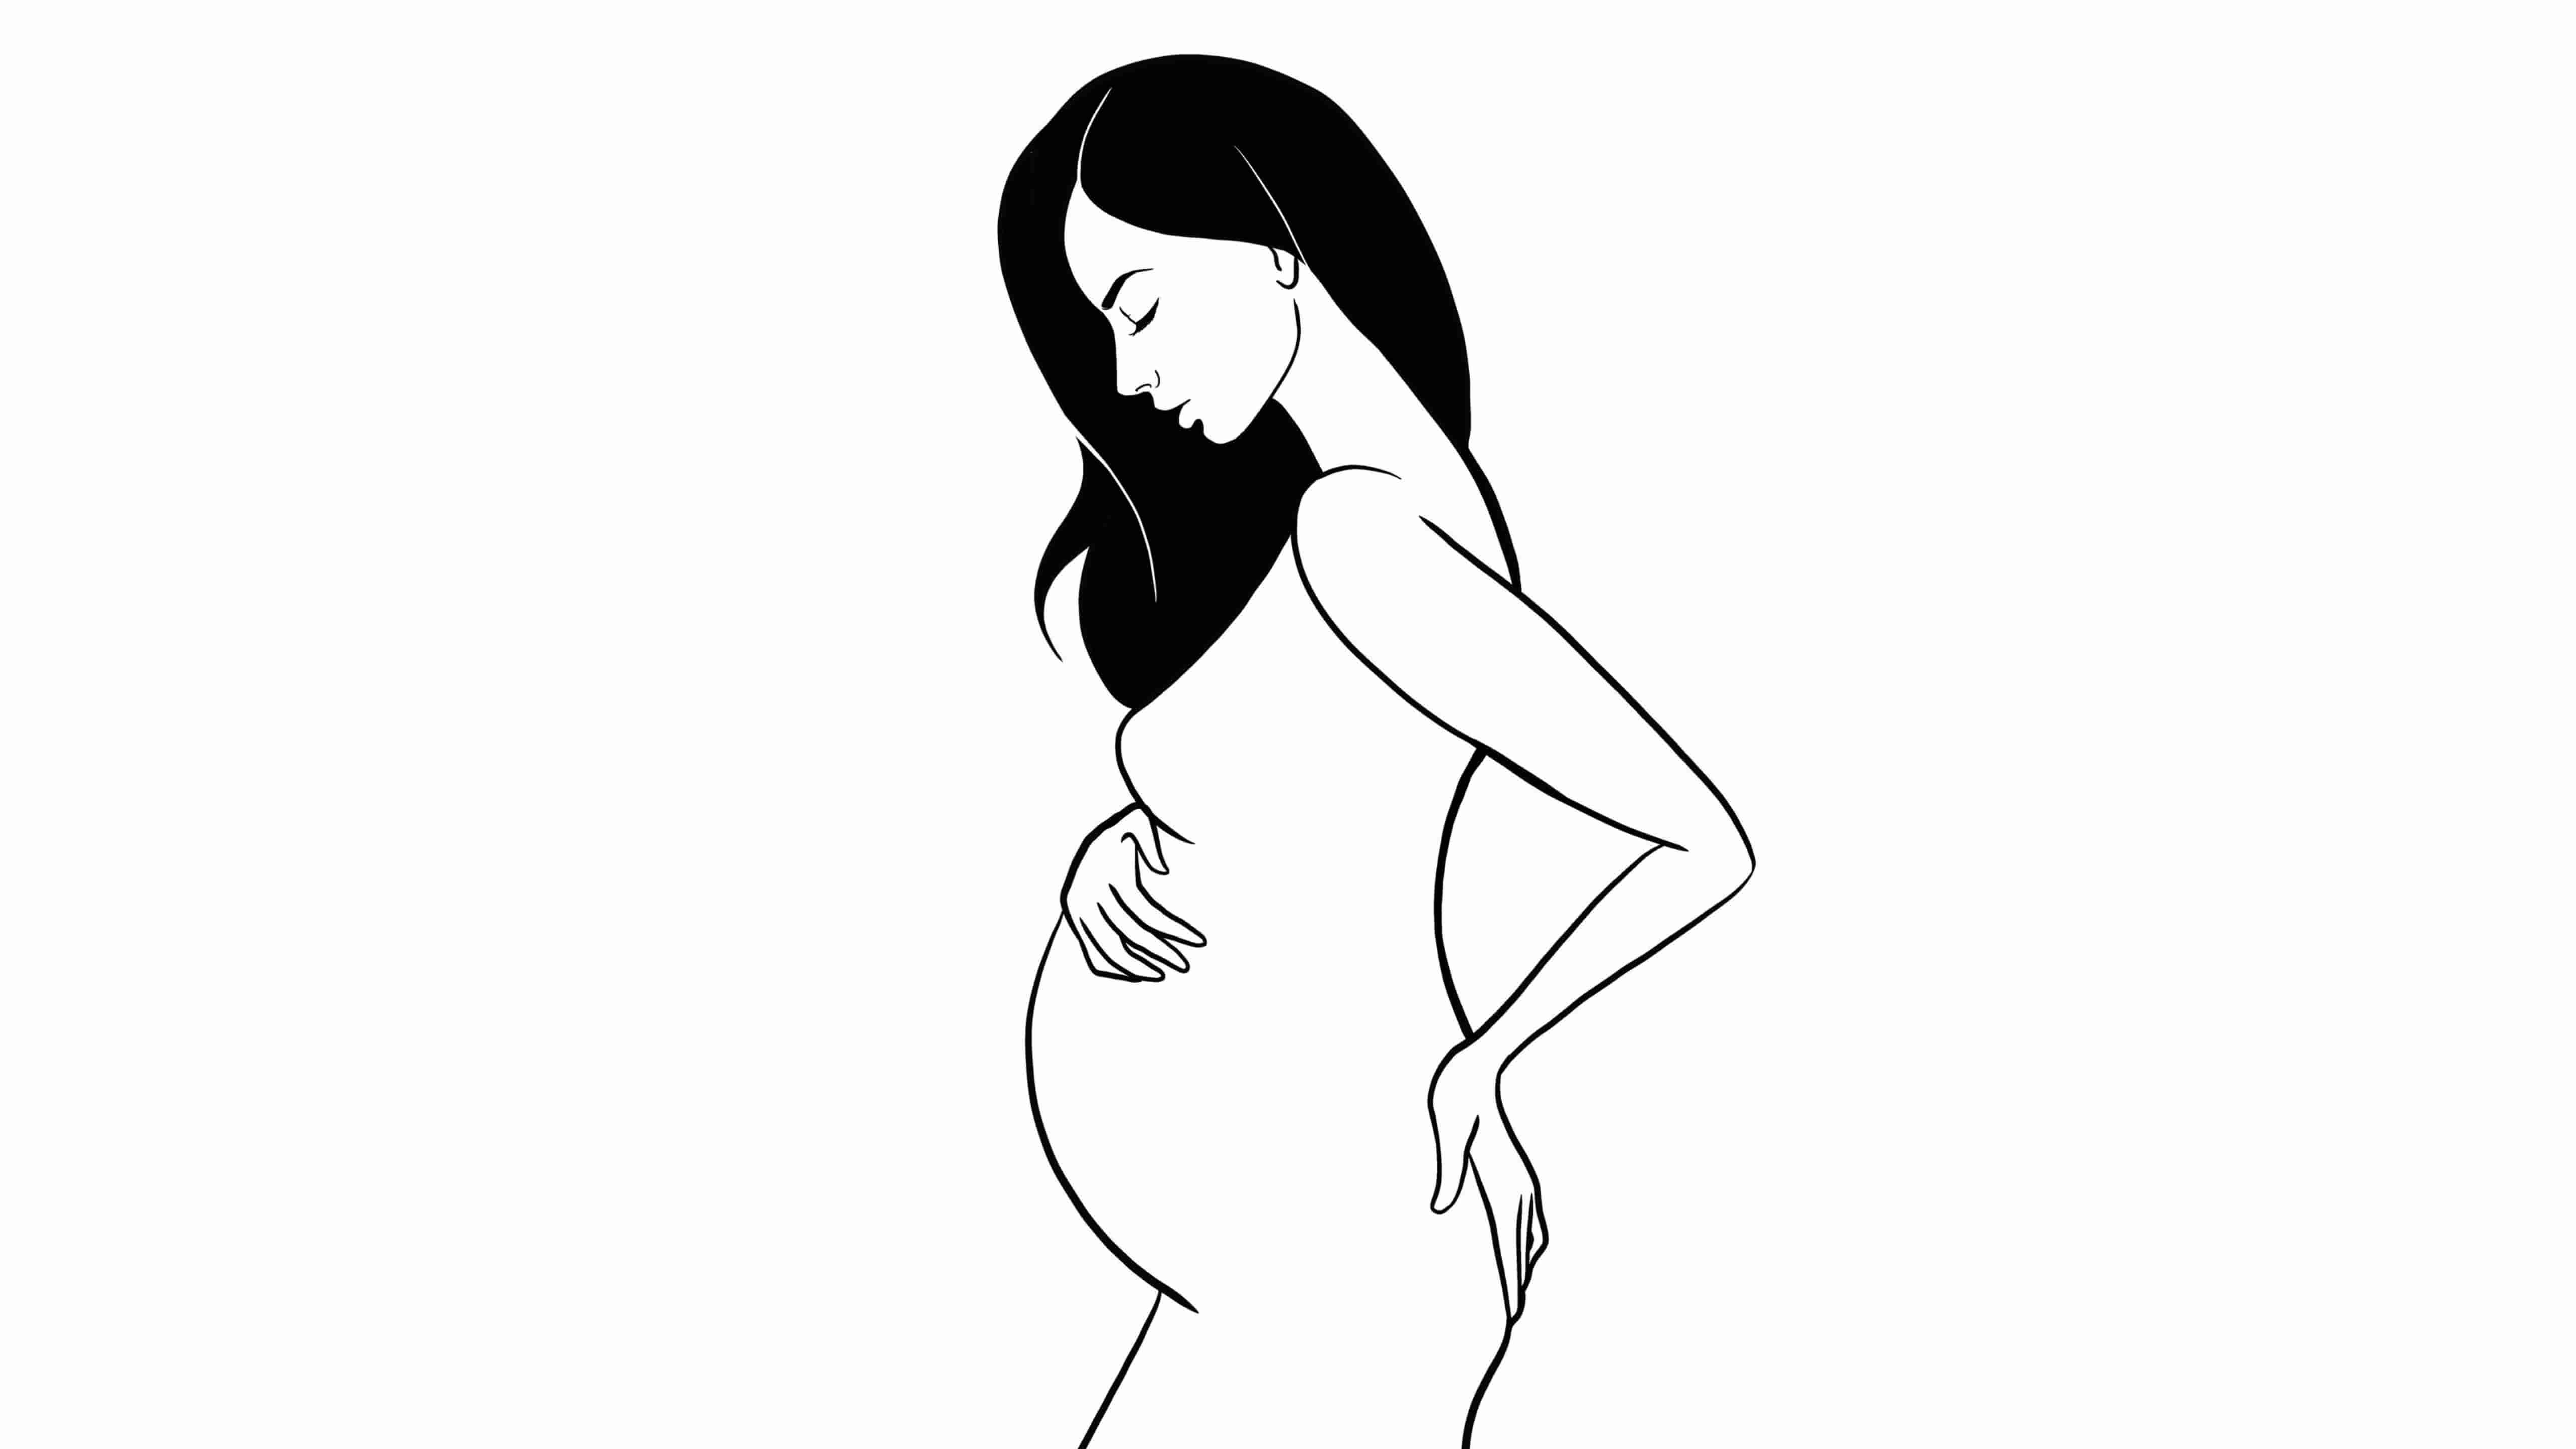 What Is the Reason for Post-Period Pain and Its Potential Link to Pregnancy Symptoms?